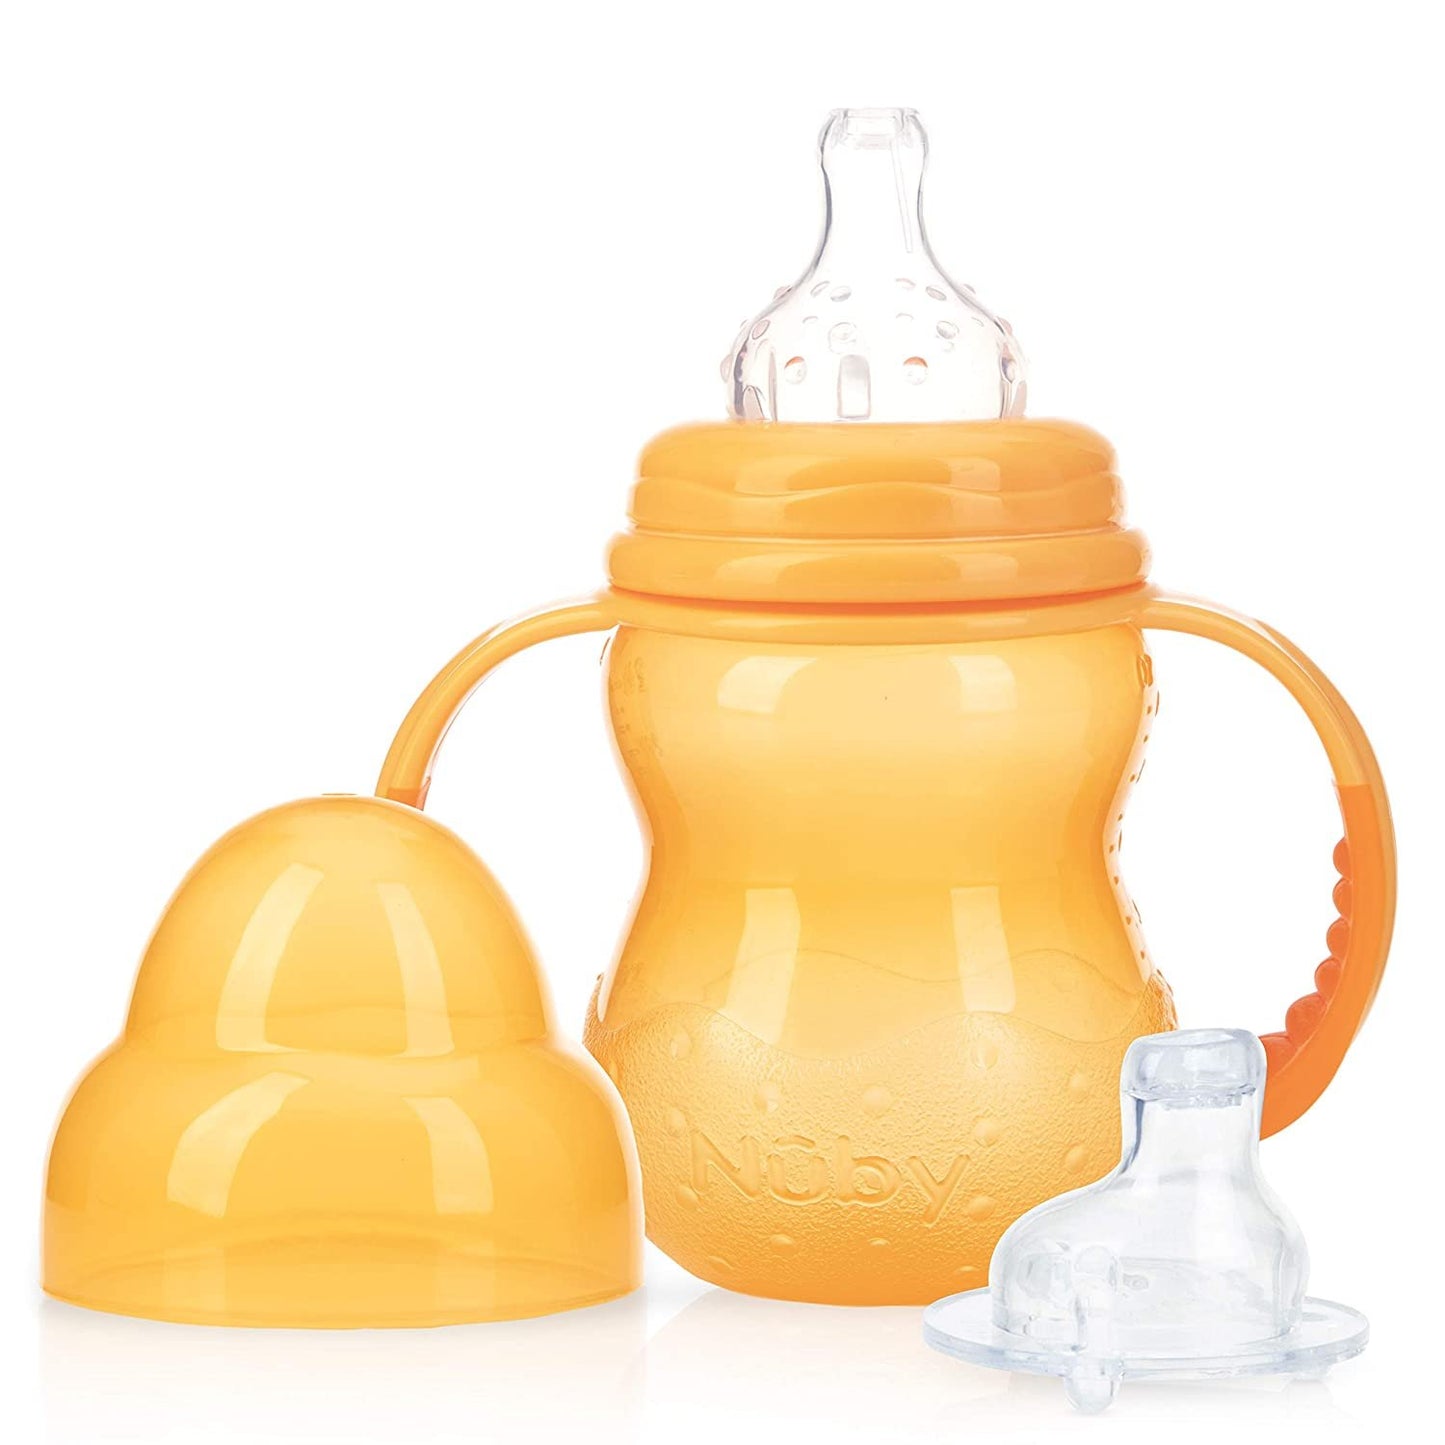 Nuby 3-Stage Wide Neck No Spill Bottle with Handles and Non-Drip Juice Spout, 3 Months, 8 Ounce, Orange